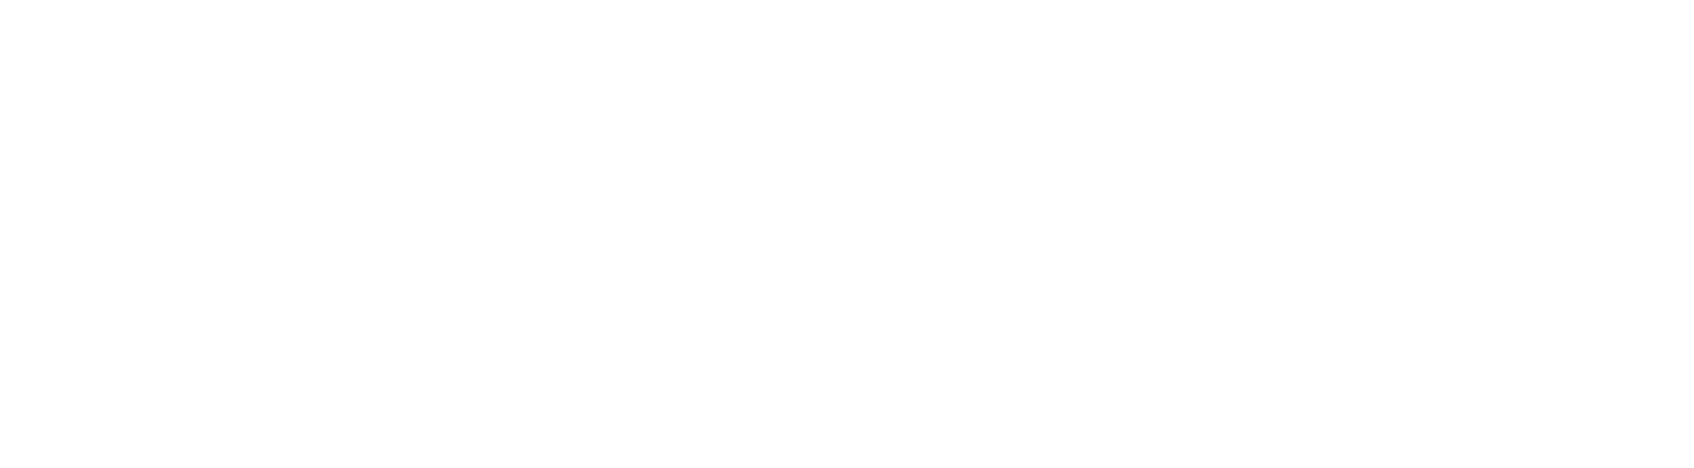 ITG Information Technology Group